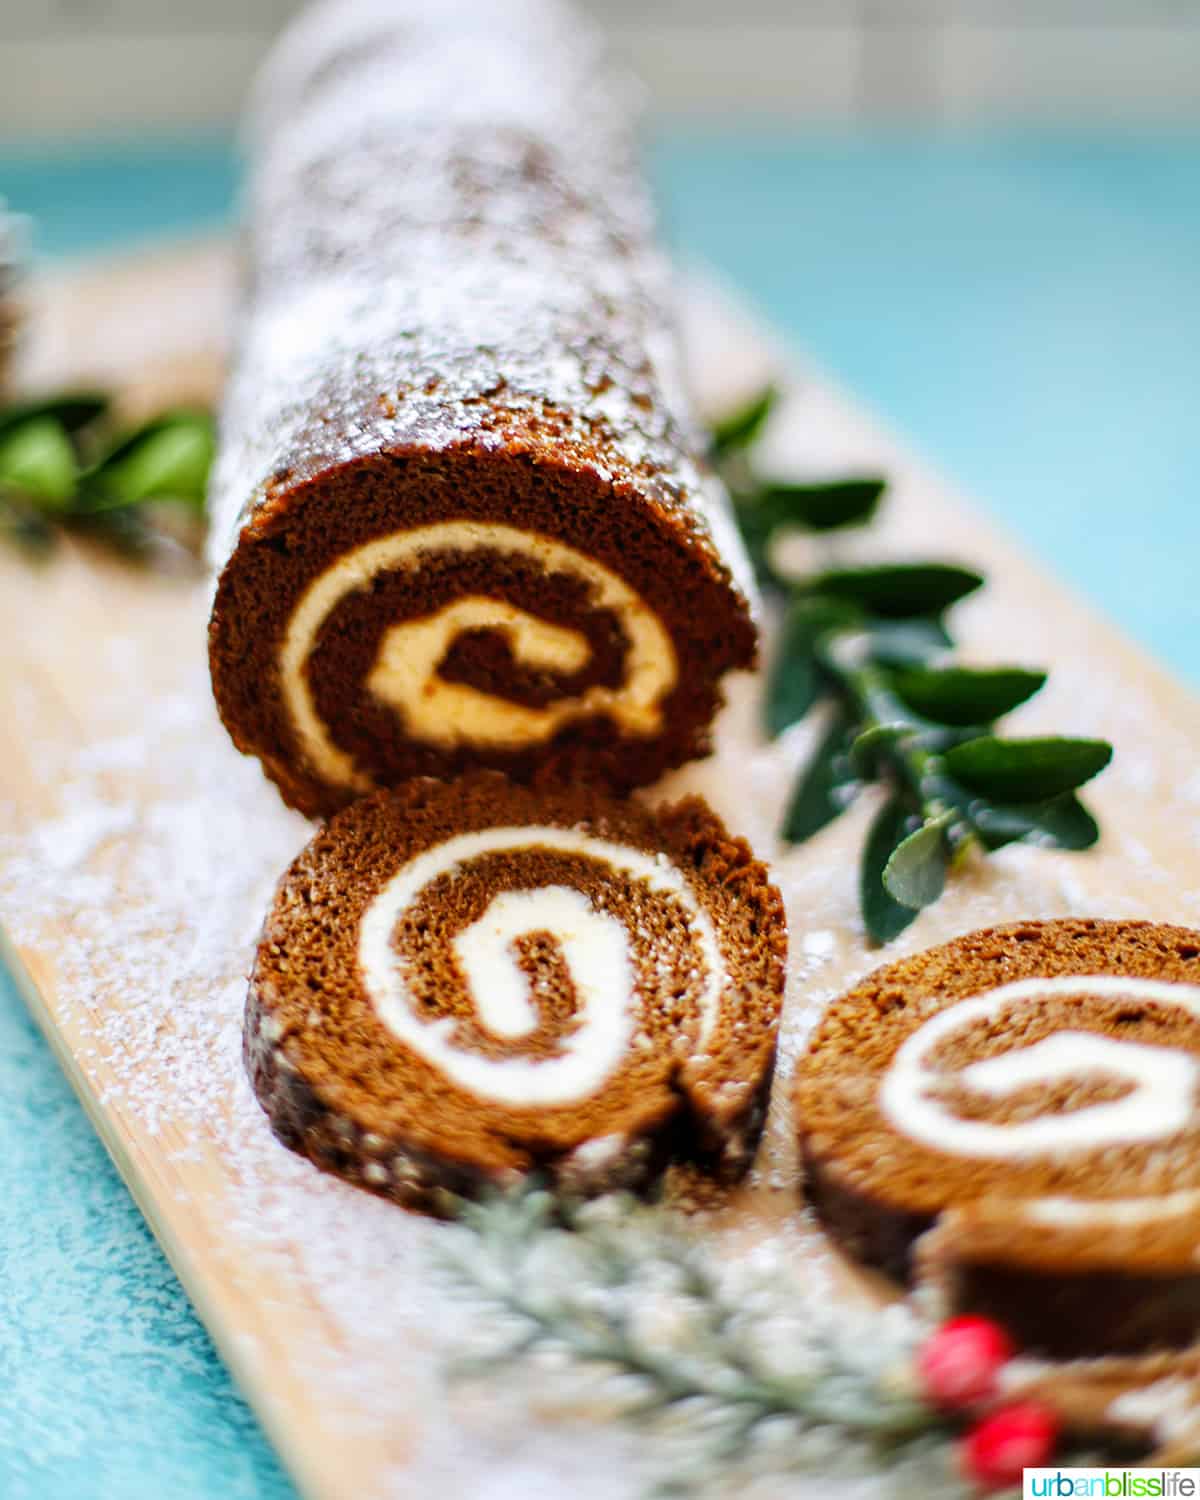 Gingerbread cake roll with holiday trimmings, cream cheese filling, and Christmas decorations.